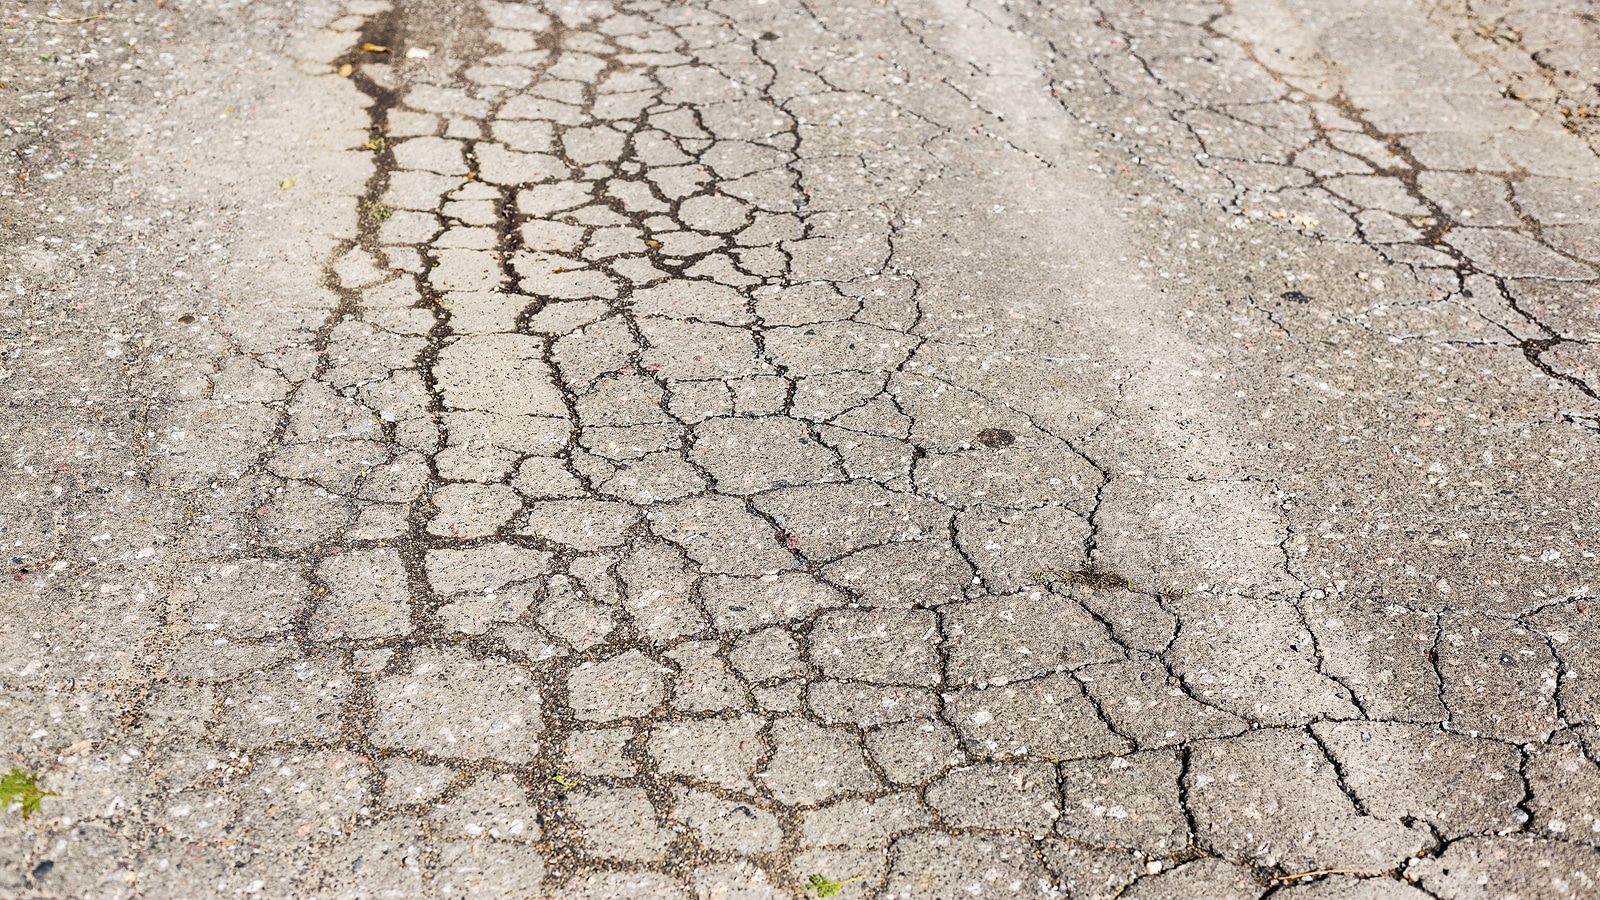 Can A City Be Liable for Potholes?